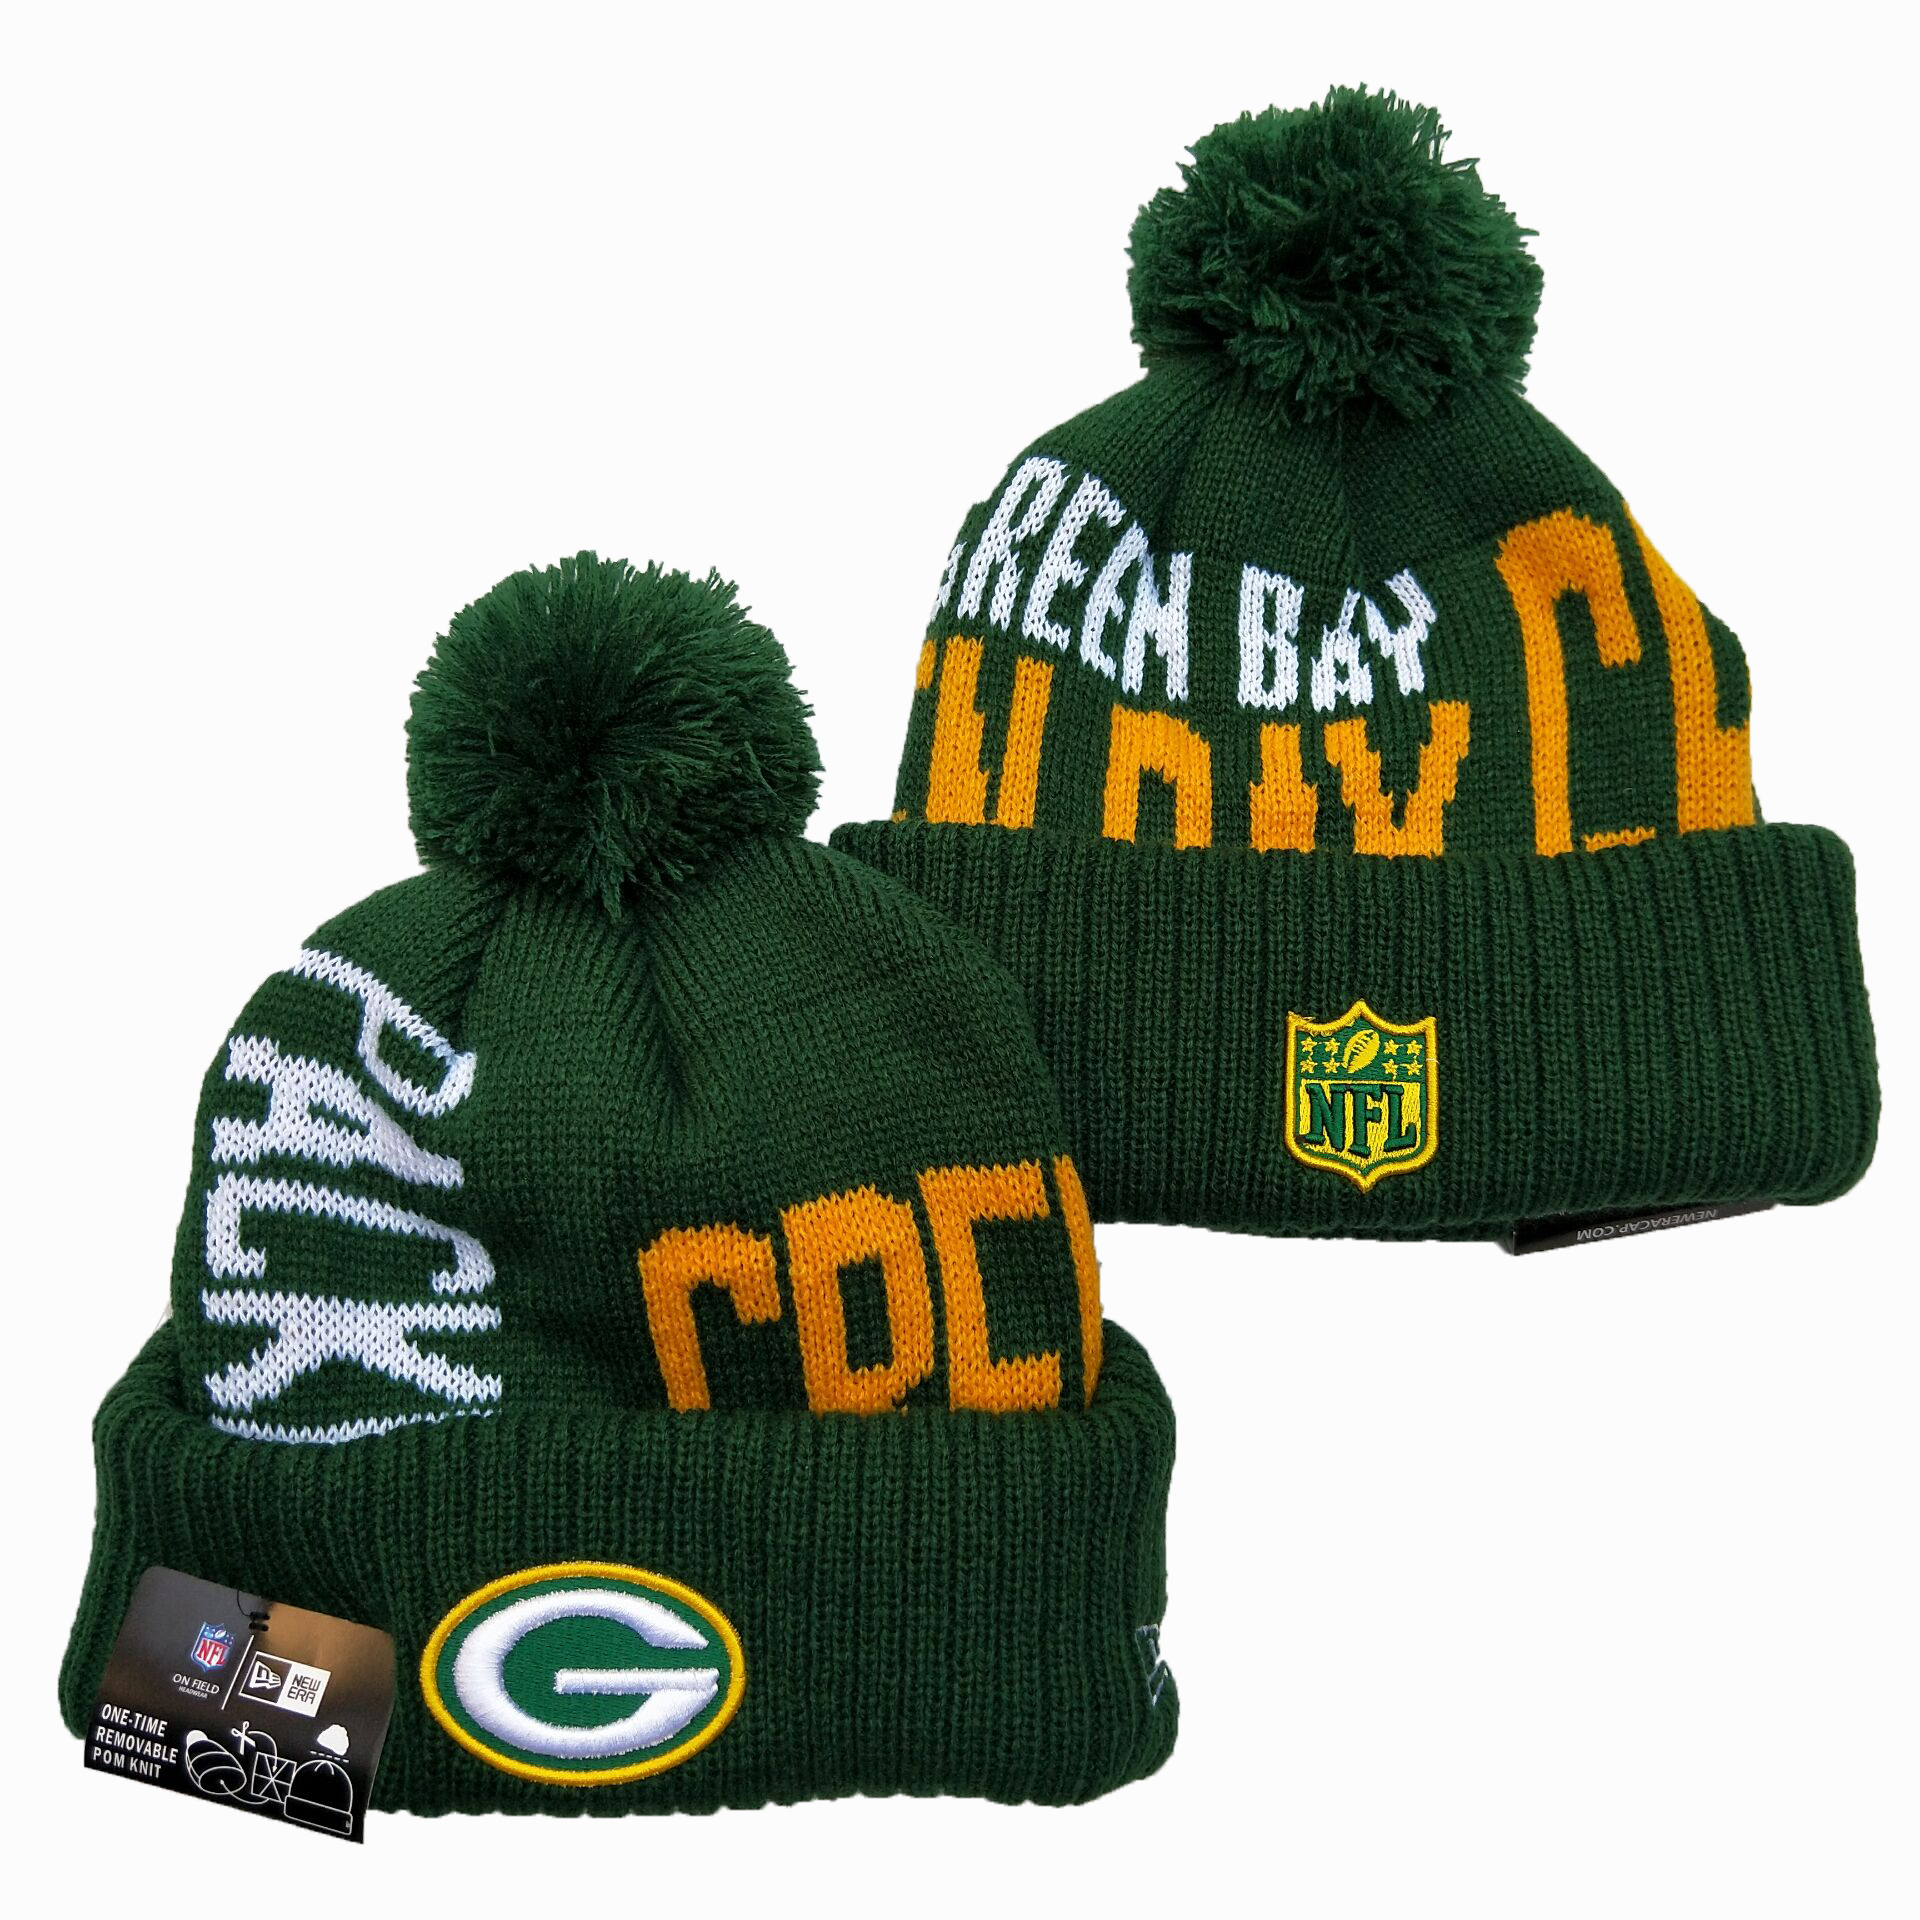 Green Bay Packers knit Hats 077